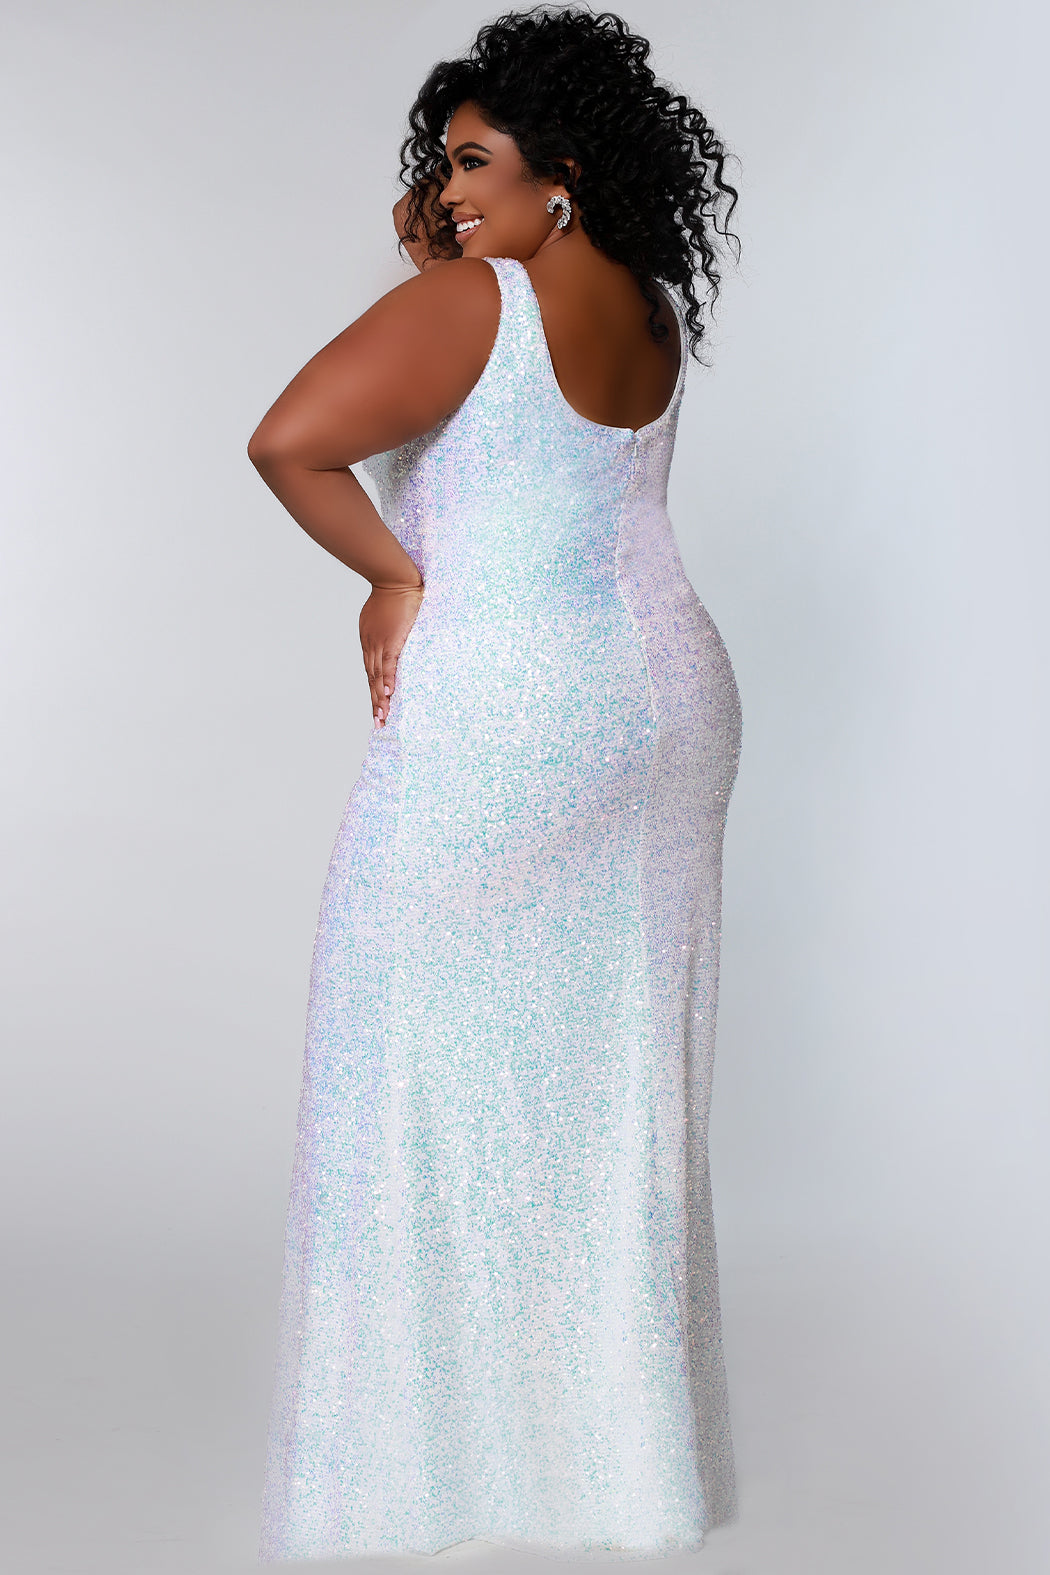 Tease Prom TE2201 Sydneys Closet Long Fitted Sequin Plus size prom dress slit  Colors: Aqua, Peach, Unicorn Size Availability: 14-28 Fitted silhouette V-neckline Pleated bodice Empire waistline Slit on right side of skirt 5 inch sweep train Bra-friendly straps Invisible zipper Scoop back Multi-dimensional sequins Stretch knit lining